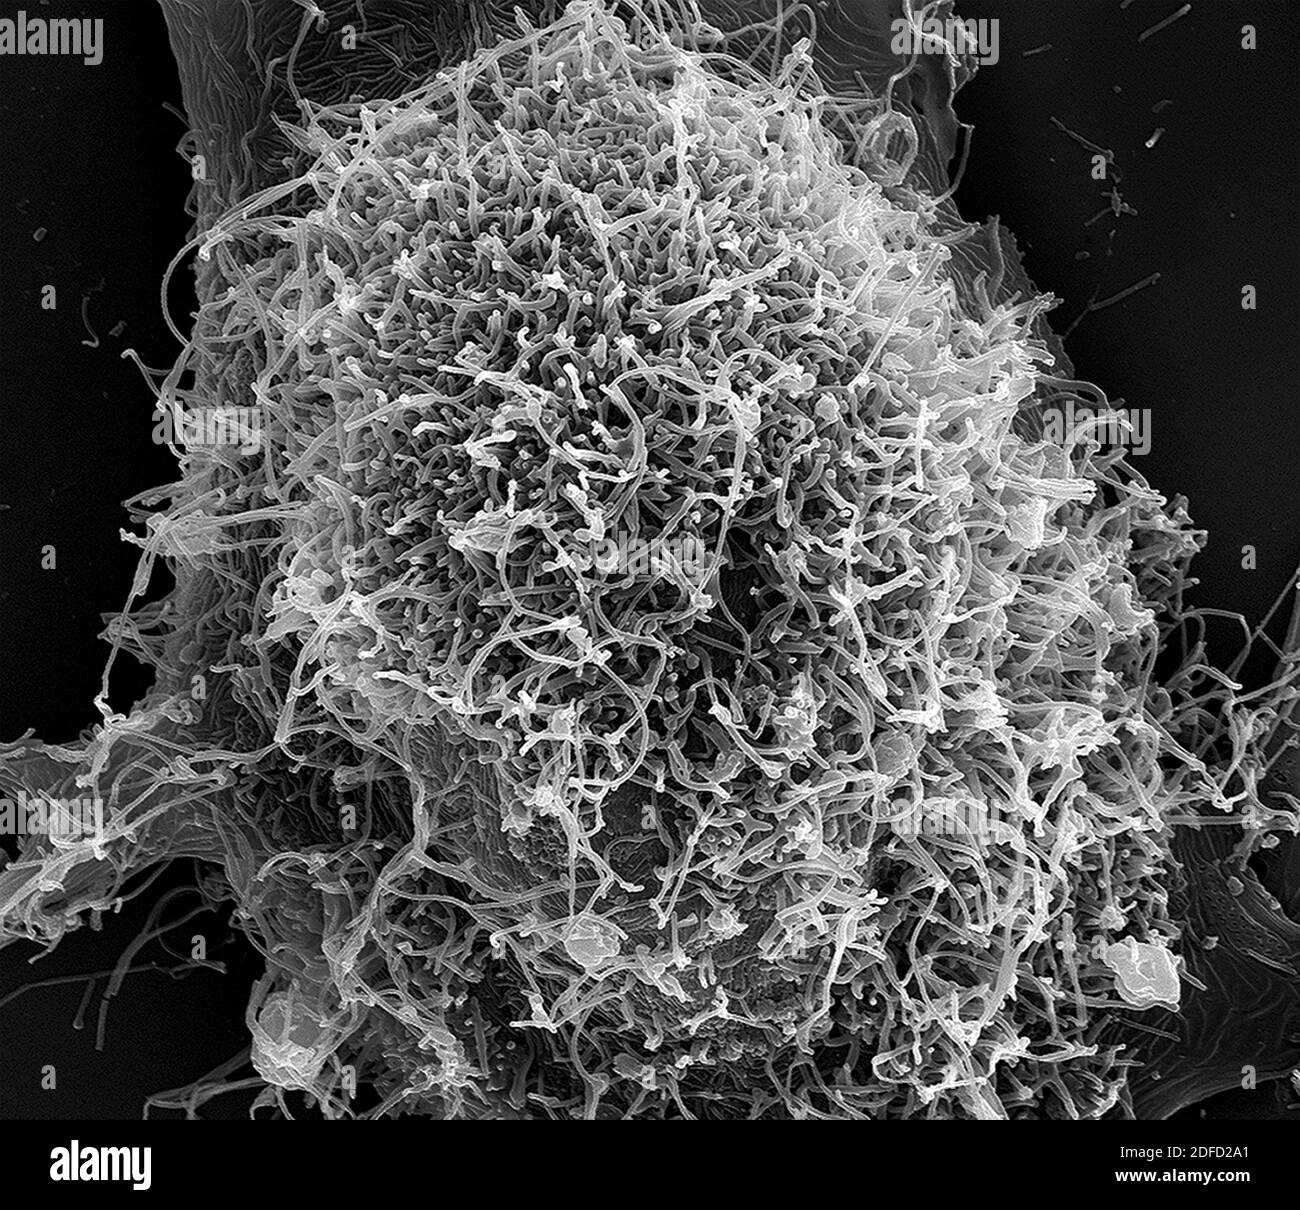 Scanning electron micrograph of filamentous Ebola virus particles attached and budding from chronically infected VERO E6 cells (15,000x magnification) Stock Photo